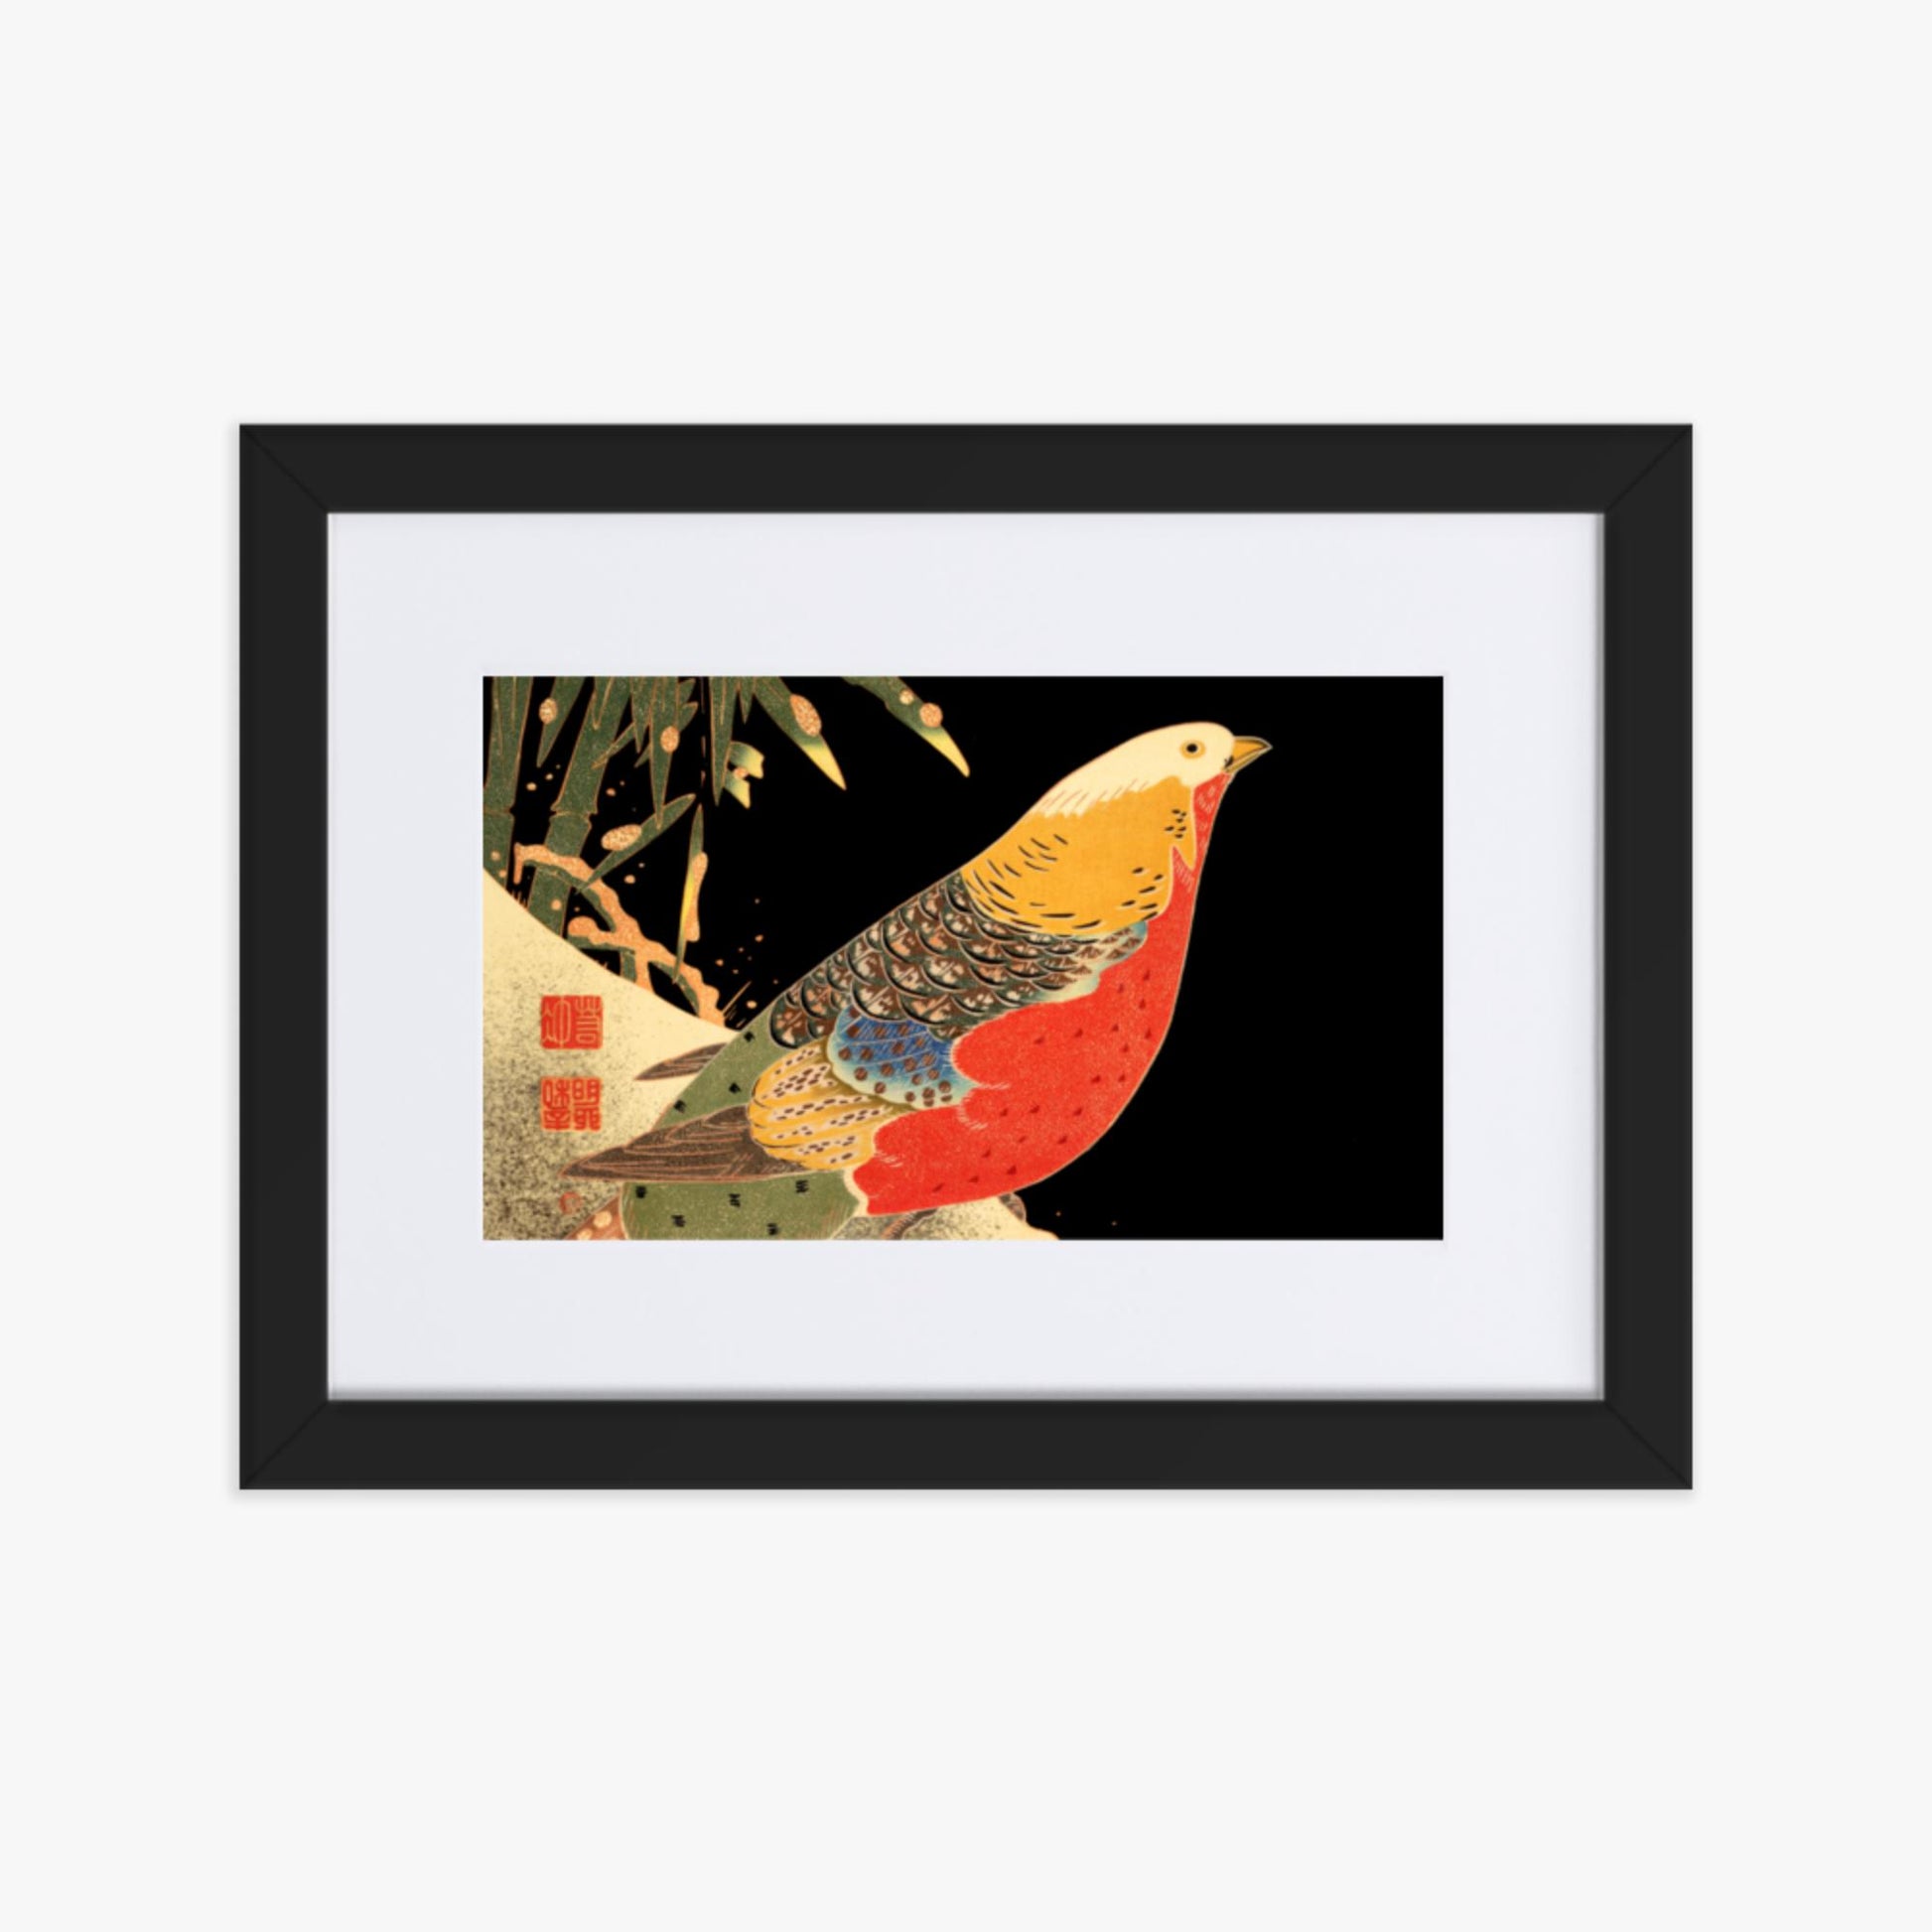 Ito Jakuchu - Golden Pheasant in the Snow 21x30 cm Poster With Black Frame